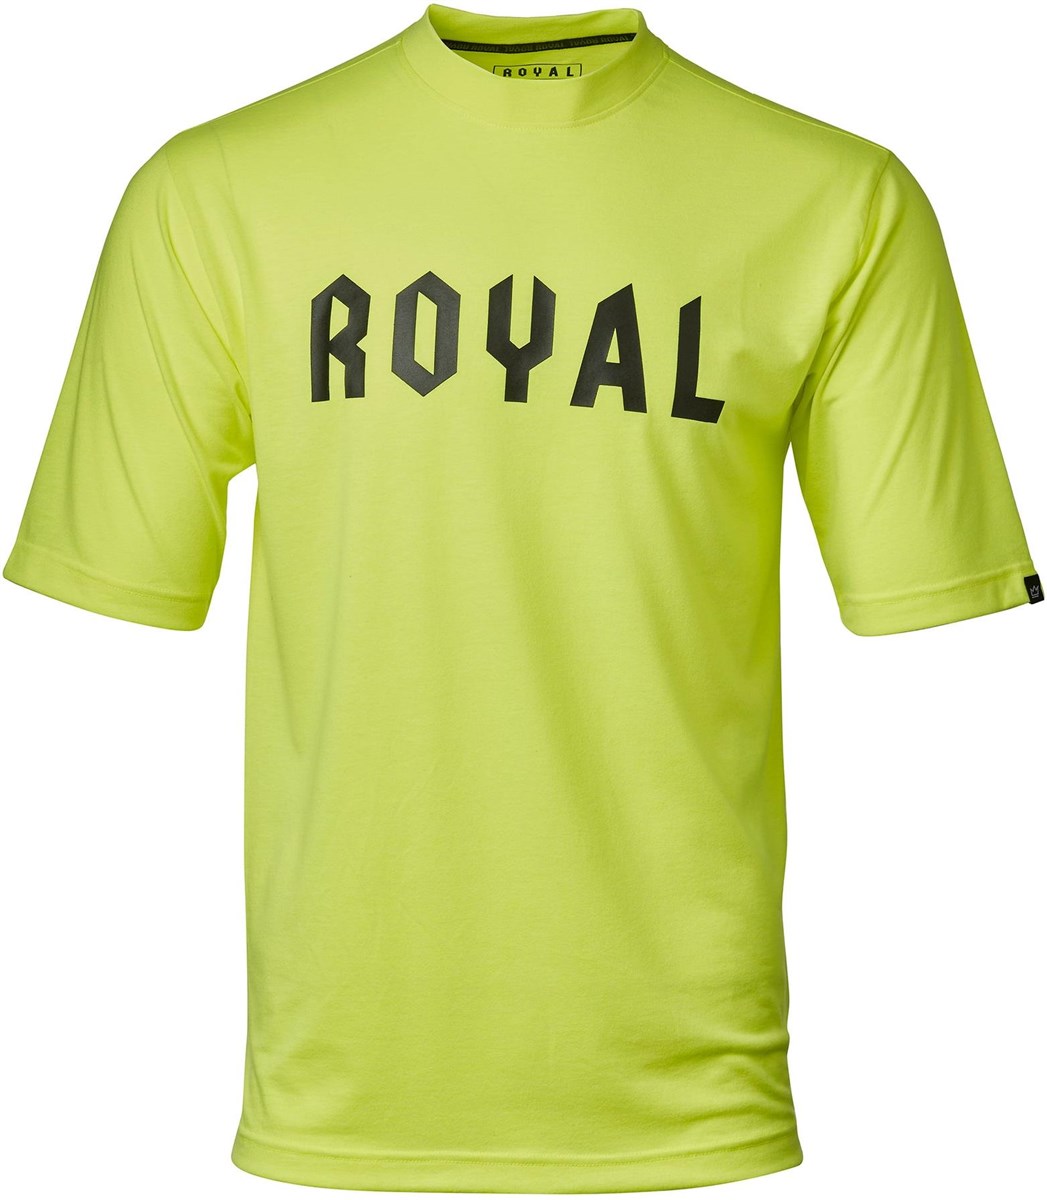 Royal Core Short Sleeve Cycling Corp Jersey product image